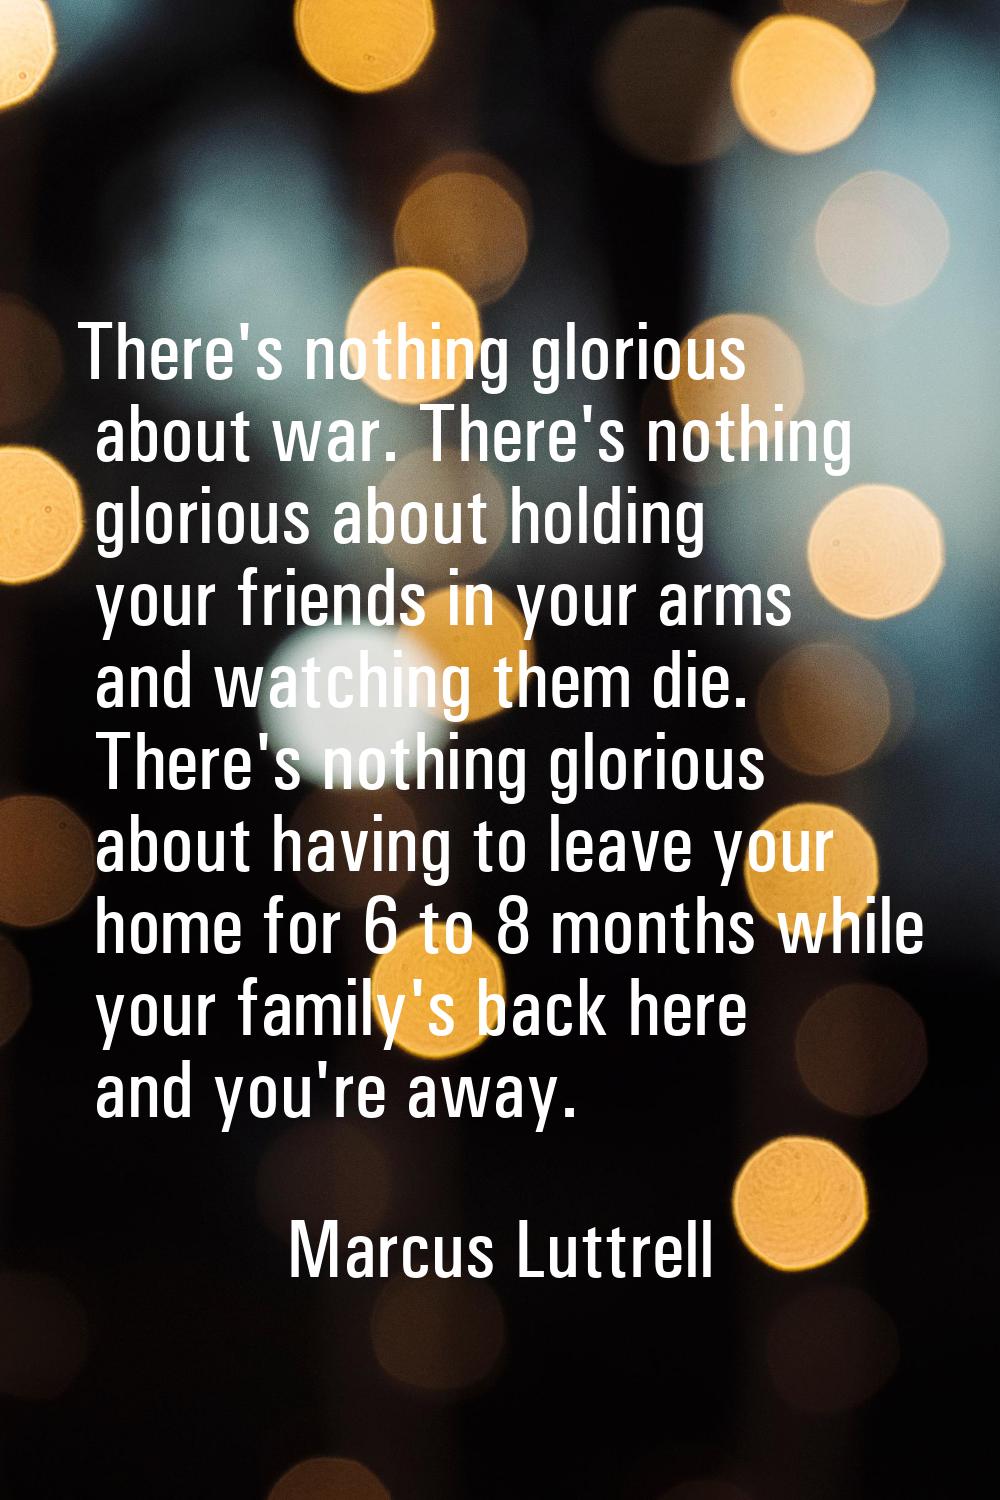 There's nothing glorious about war. There's nothing glorious about holding your friends in your arm